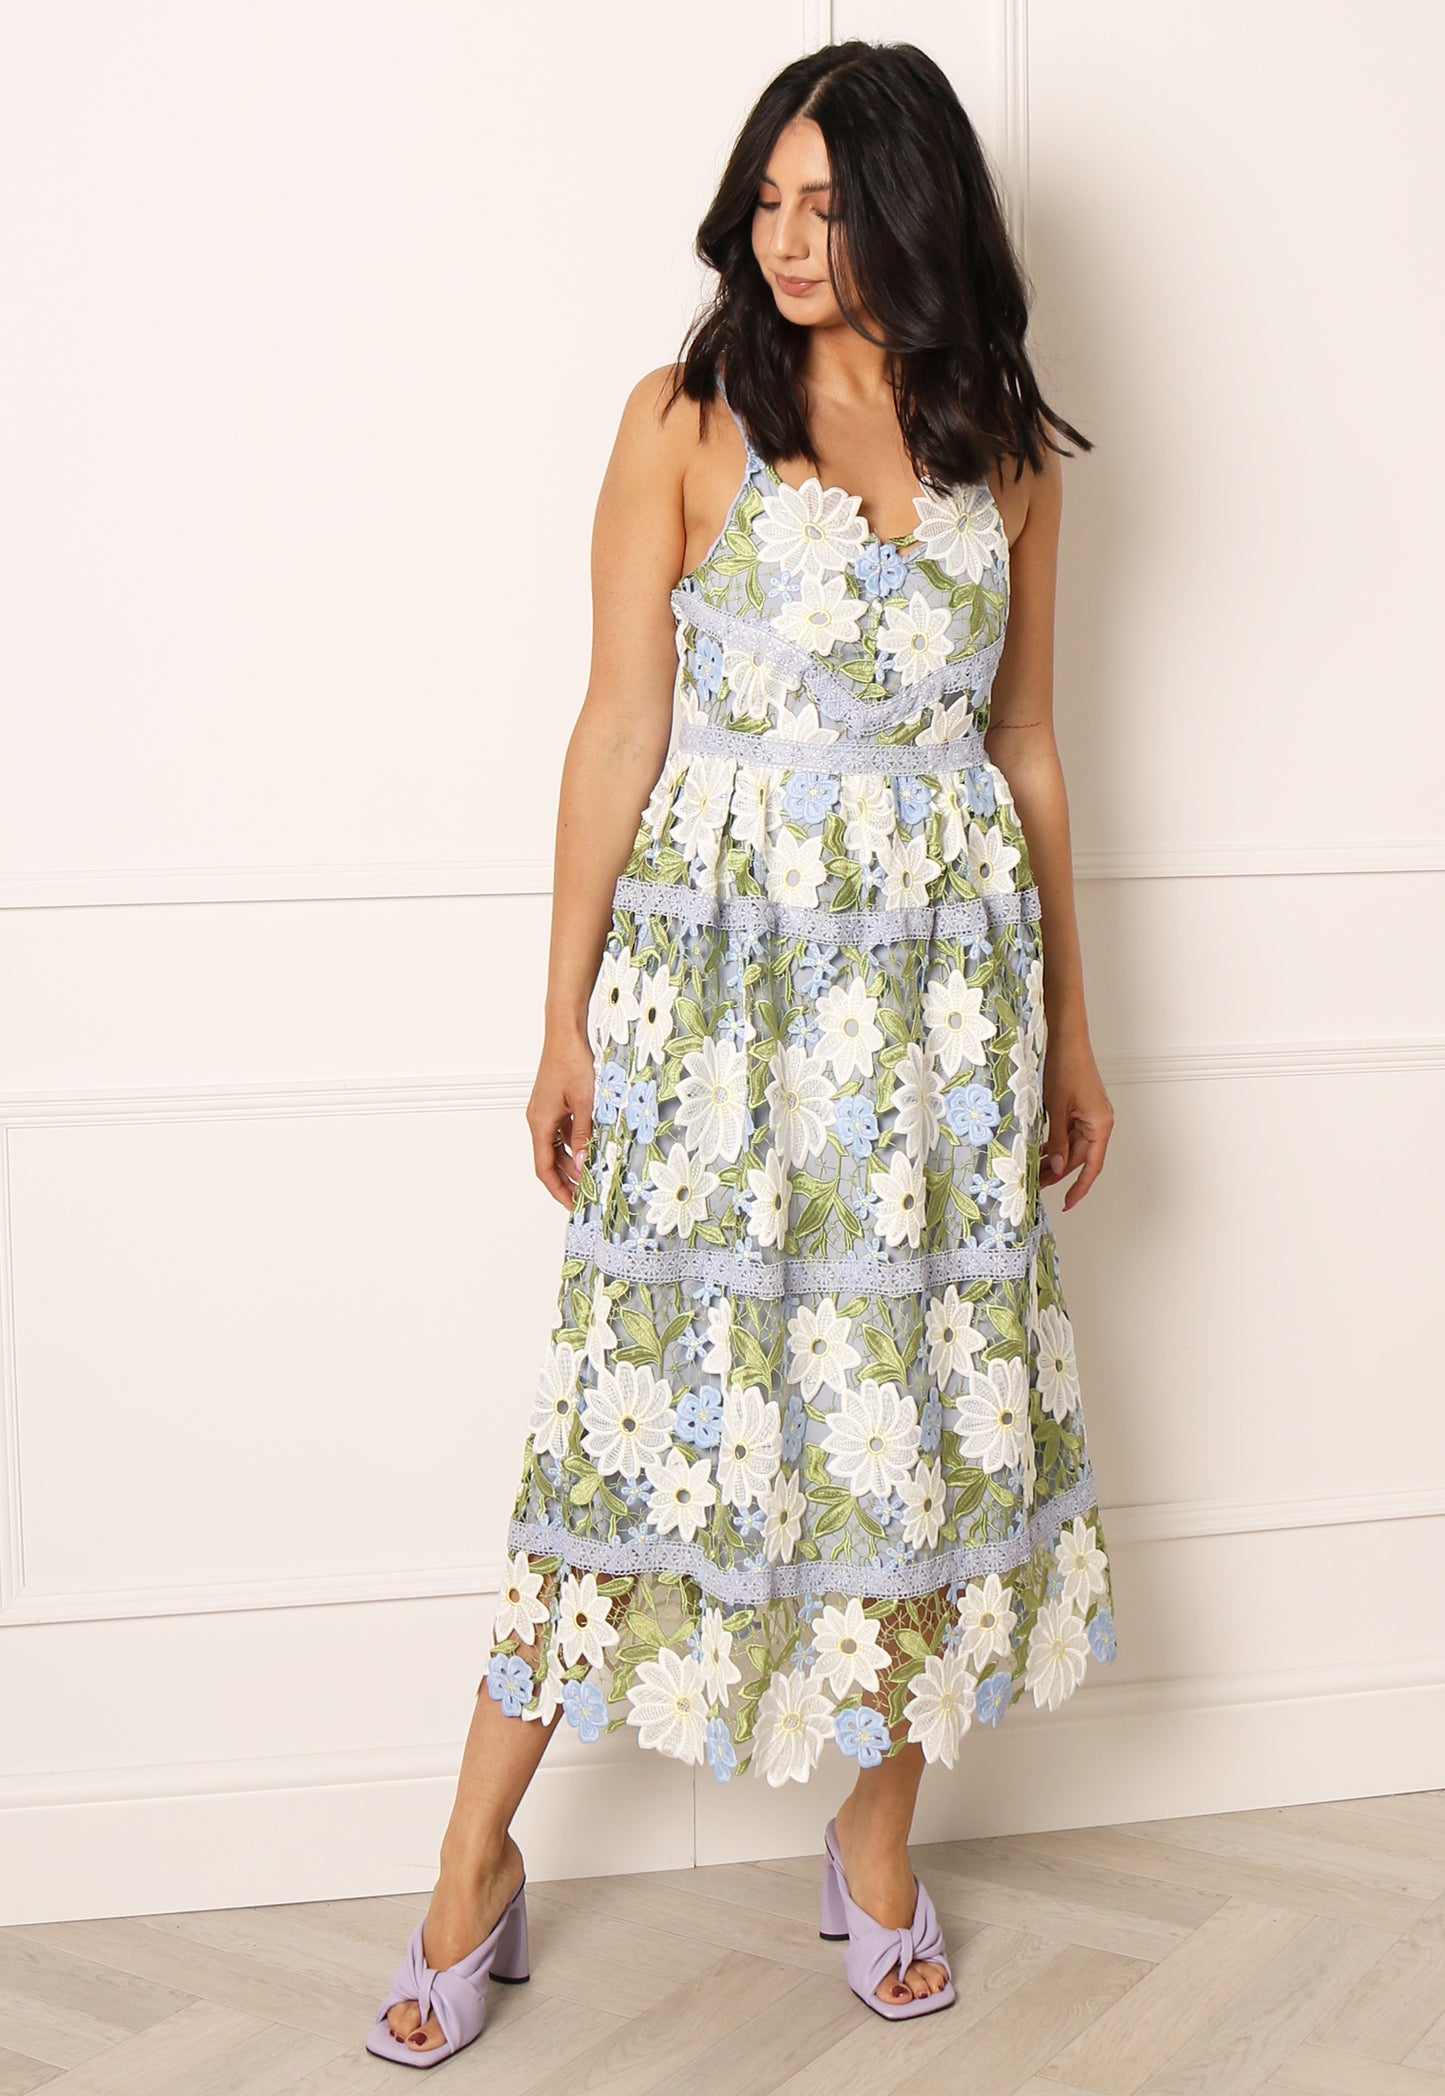 
                  
                    YAS Sun Strappy Floral Lace Appliqué Midi Dress in Blue, White & Green - One Nation Clothing
                  
                